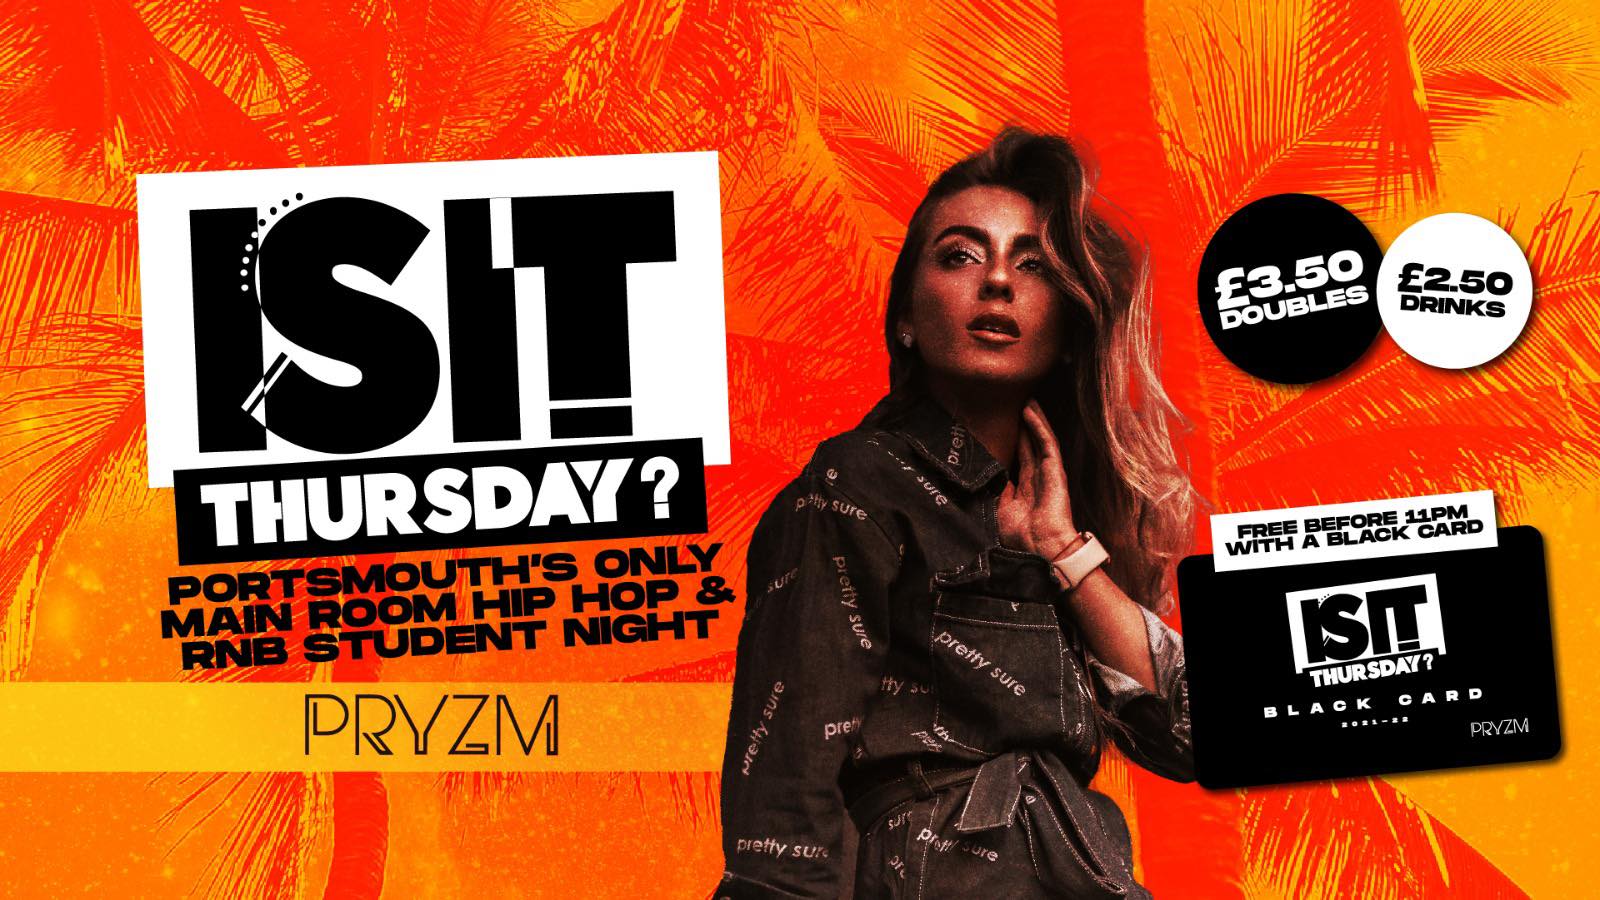 IS IT THURSDAY! Portsmouth’s Biggest Student Night!